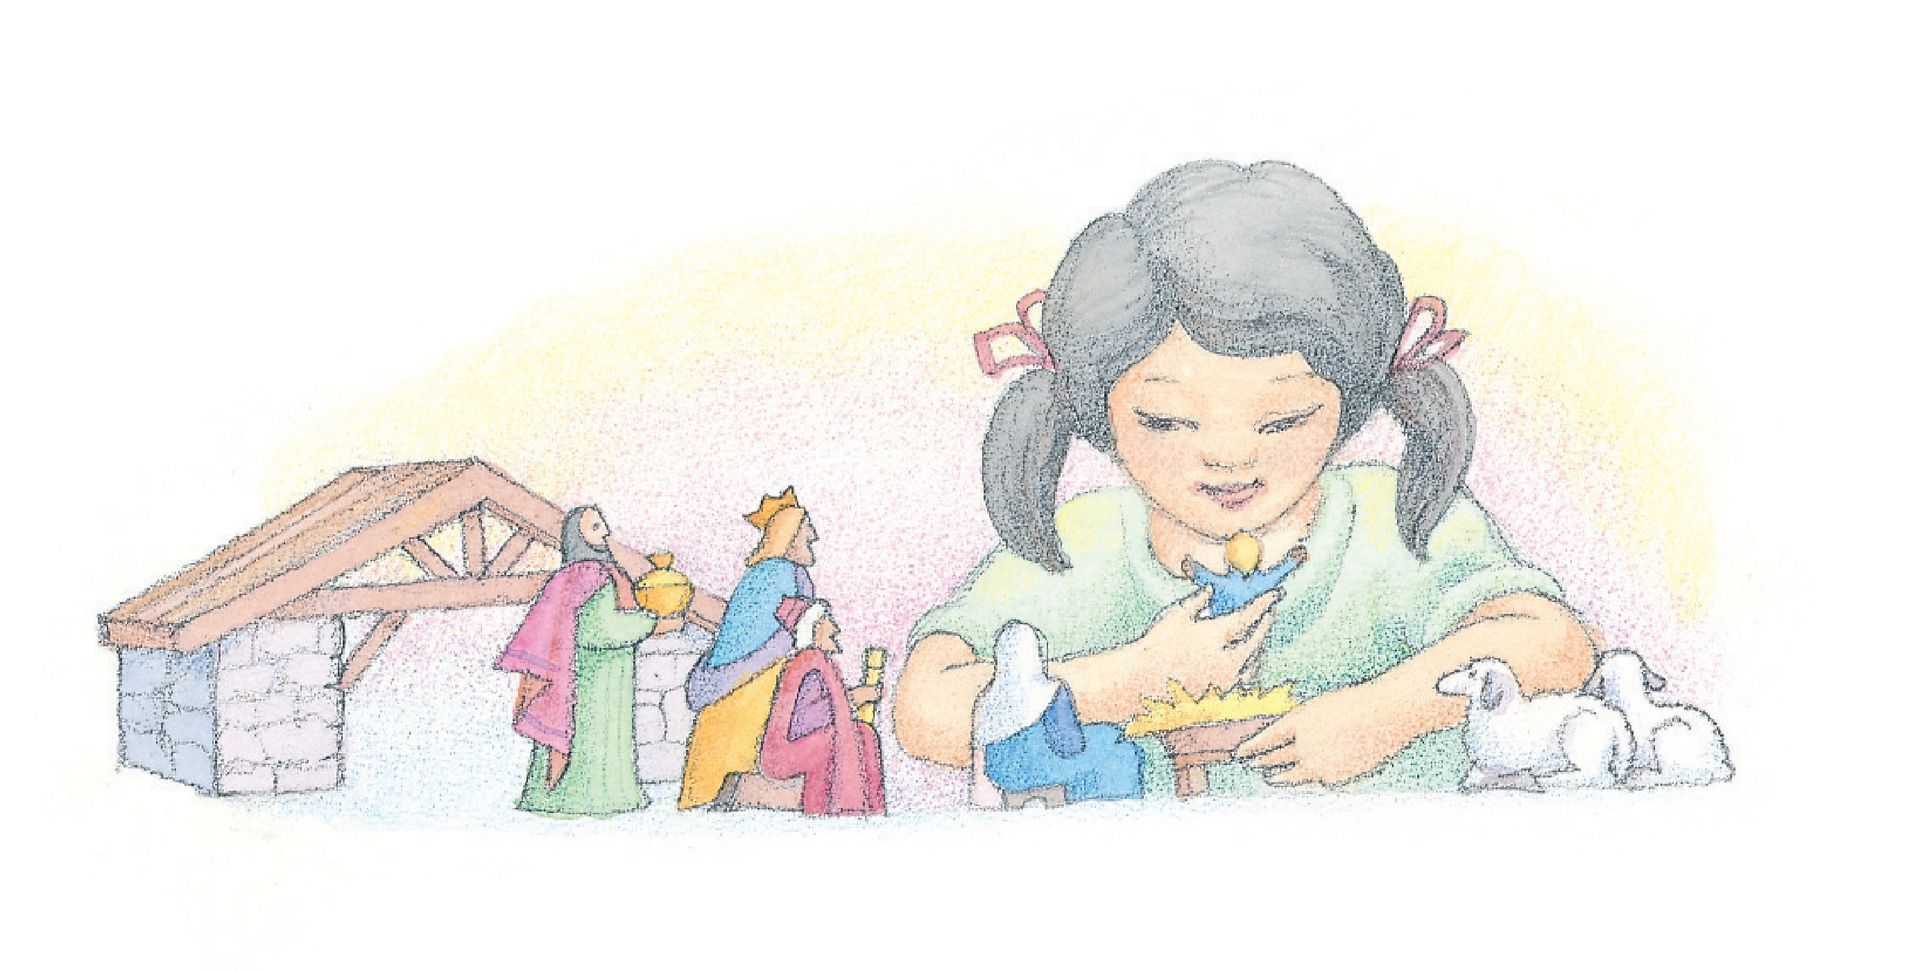 A young girl playing with Nativity scene figurines. From the Children’s Songbook, page 50, “Picture a Christmas”; watercolor illustration by Phyllis Luch.